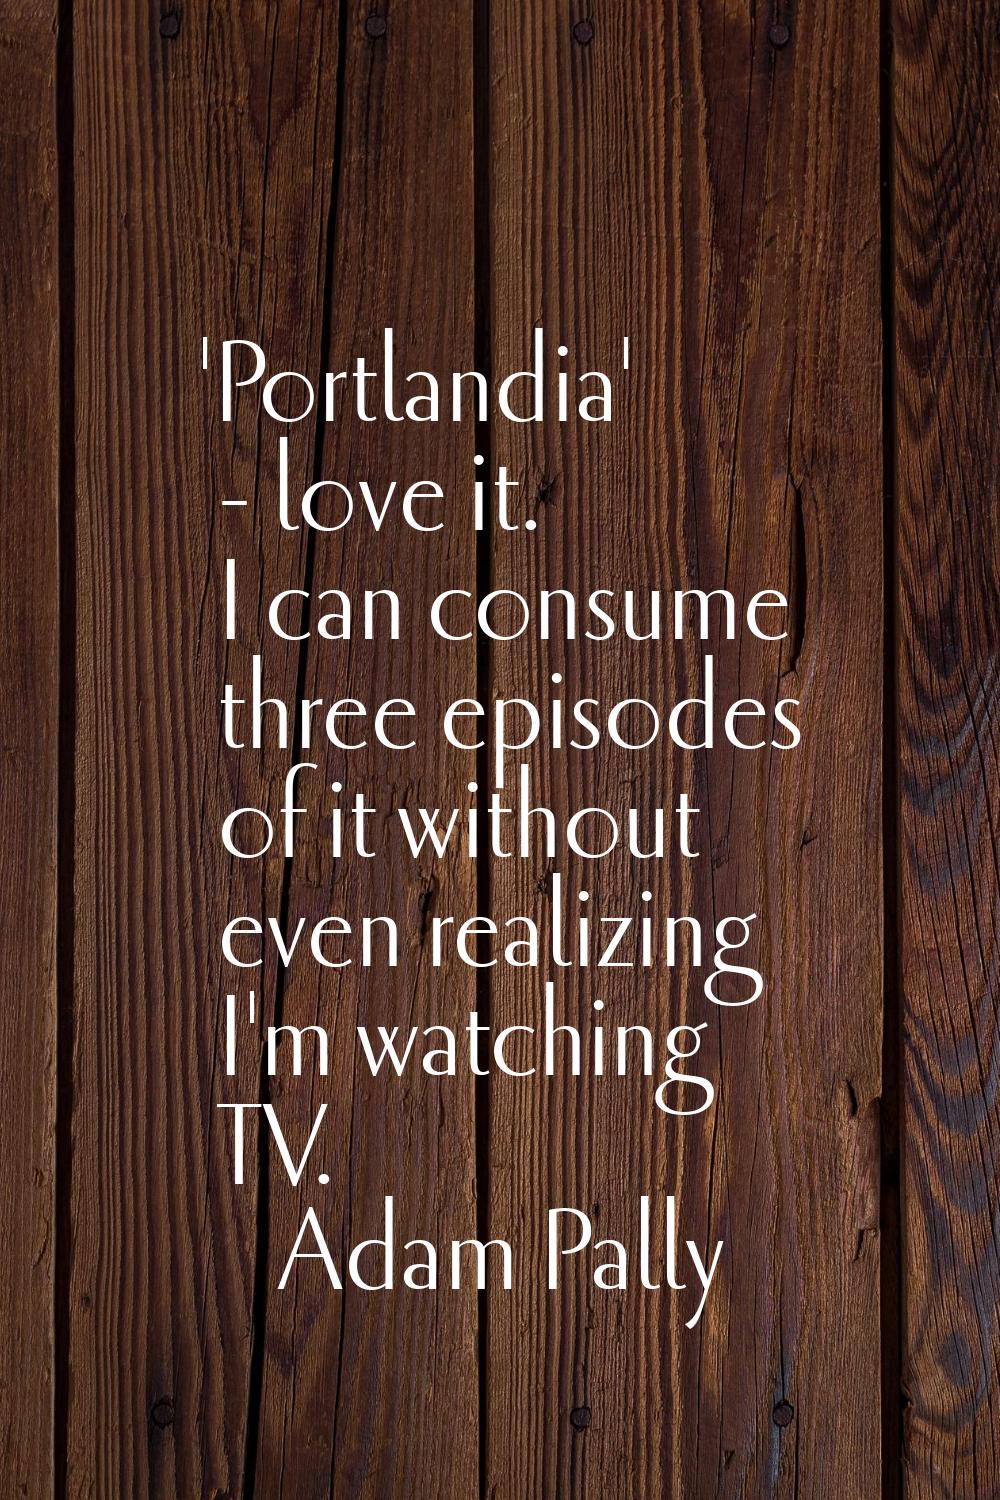 'Portlandia' - love it. I can consume three episodes of it without even realizing I'm watching TV.